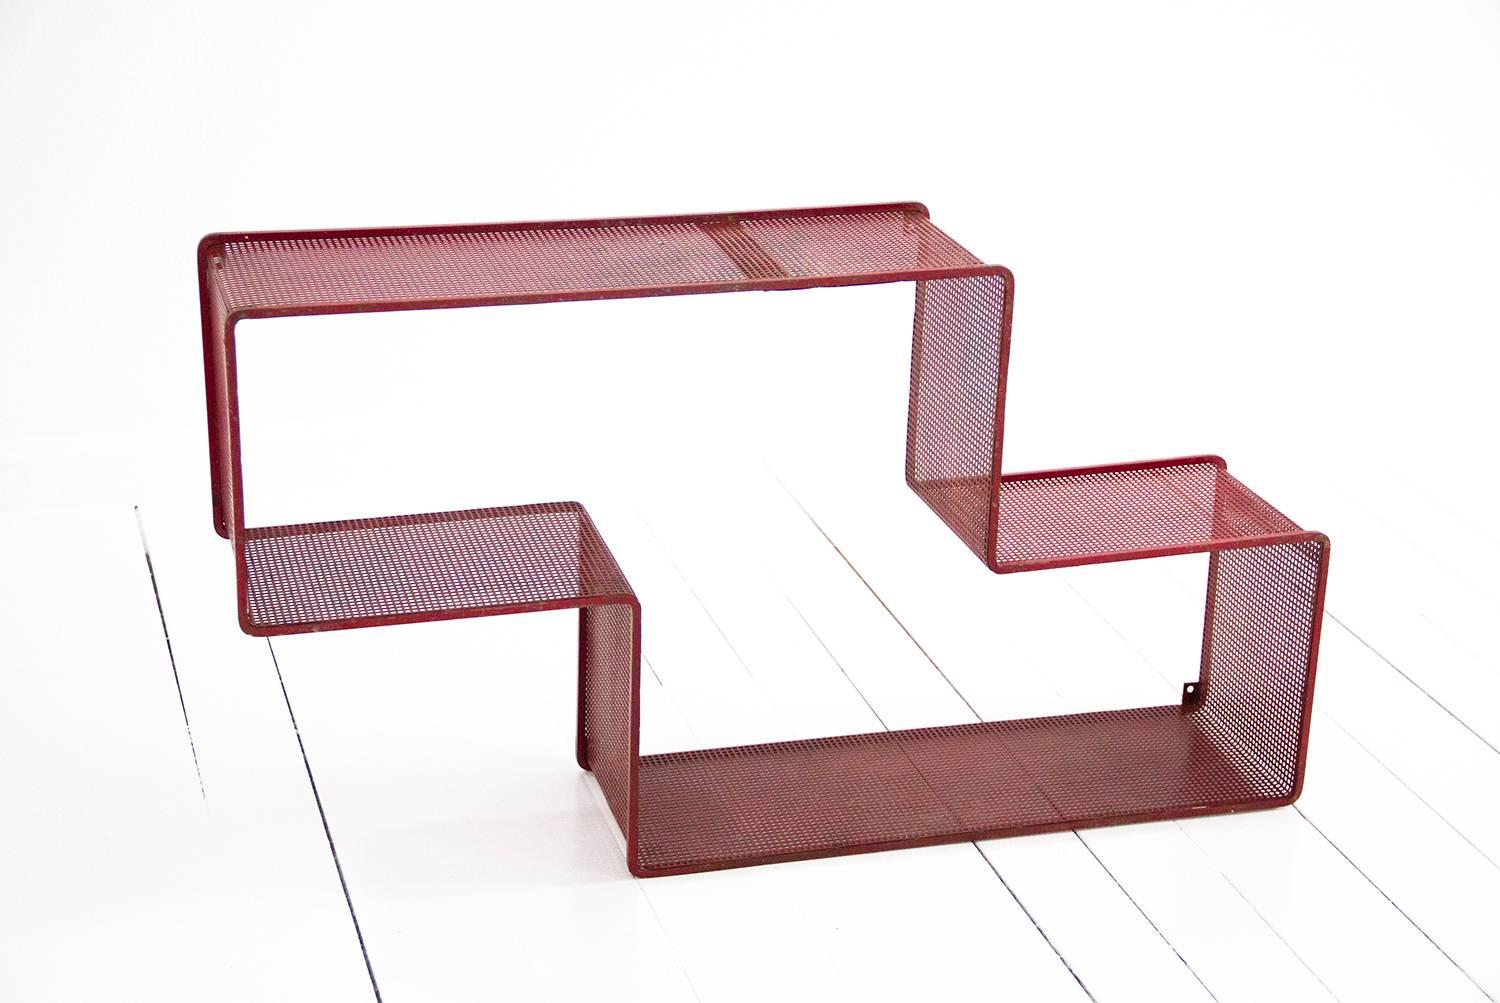 Mid-Century Modern Red Dedal Wall Shelf by Mathieu Matégot, Perforated Steel, circa 1950, France For Sale